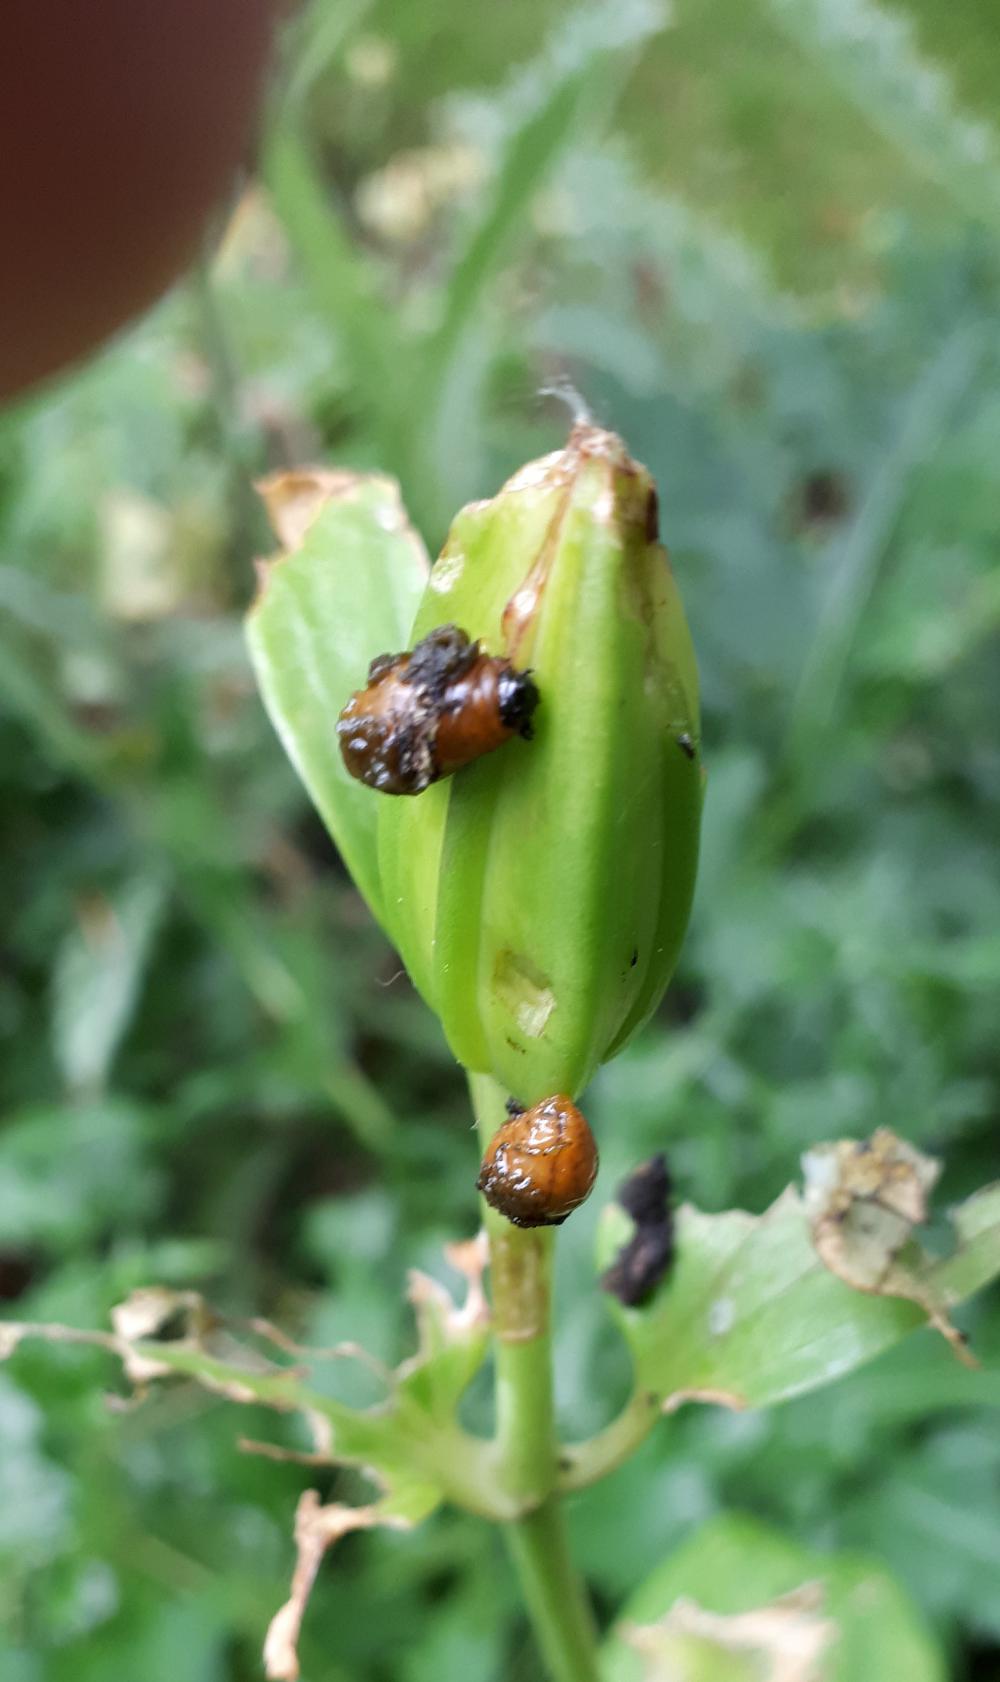 Keep looking out for lily beetles